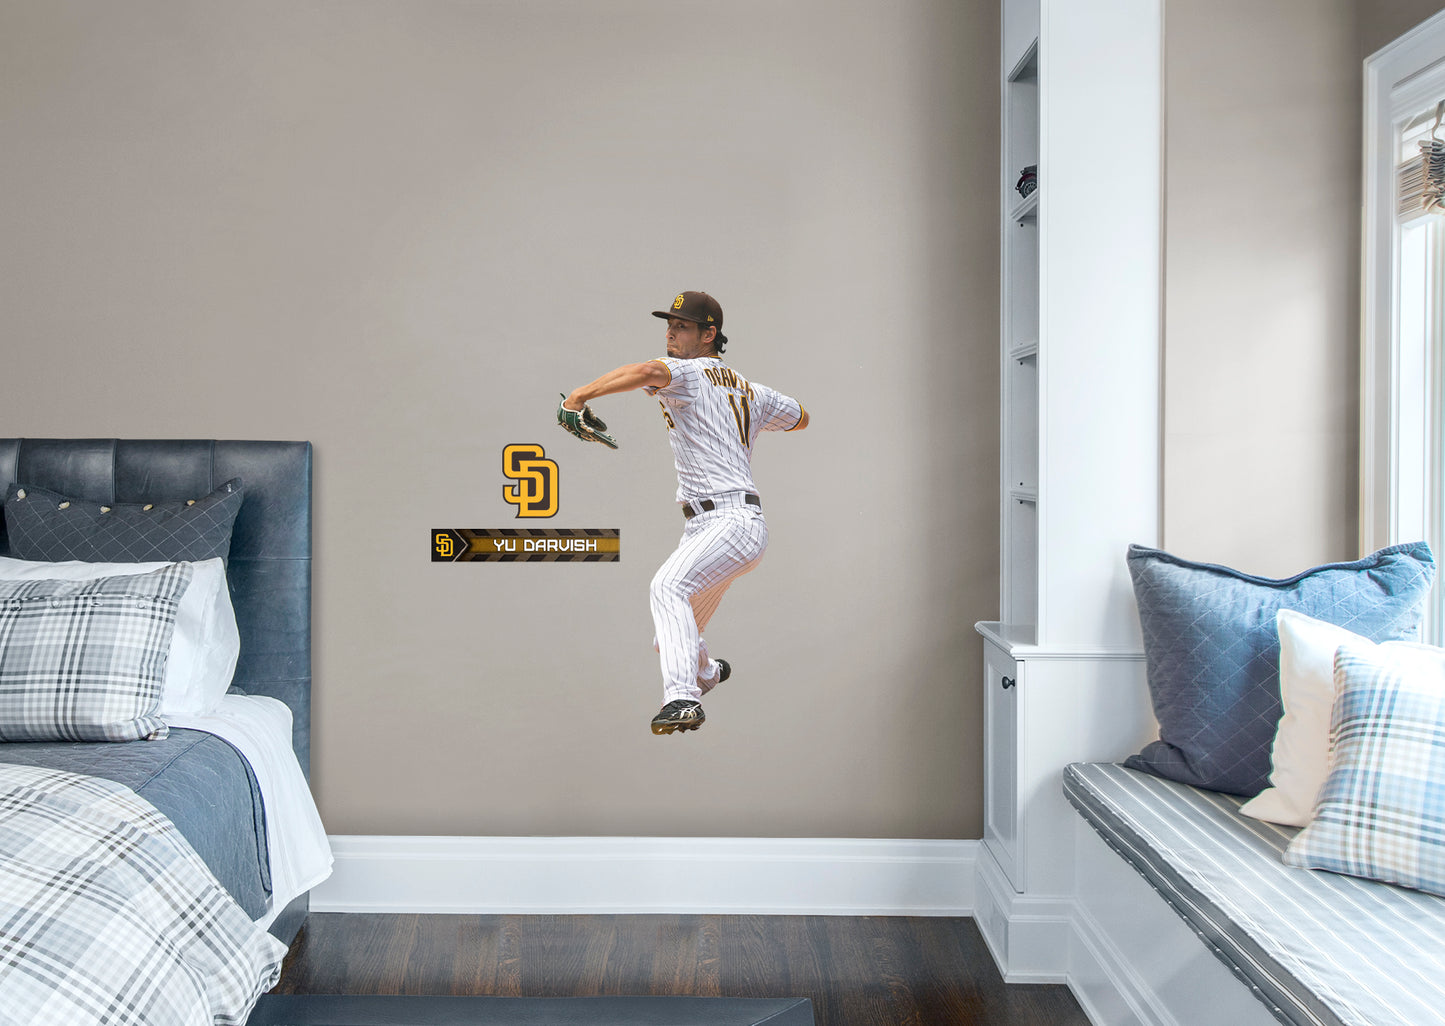 San Diego Padres: Yu Darvish         - Officially Licensed MLB Removable Wall   Adhesive Decal